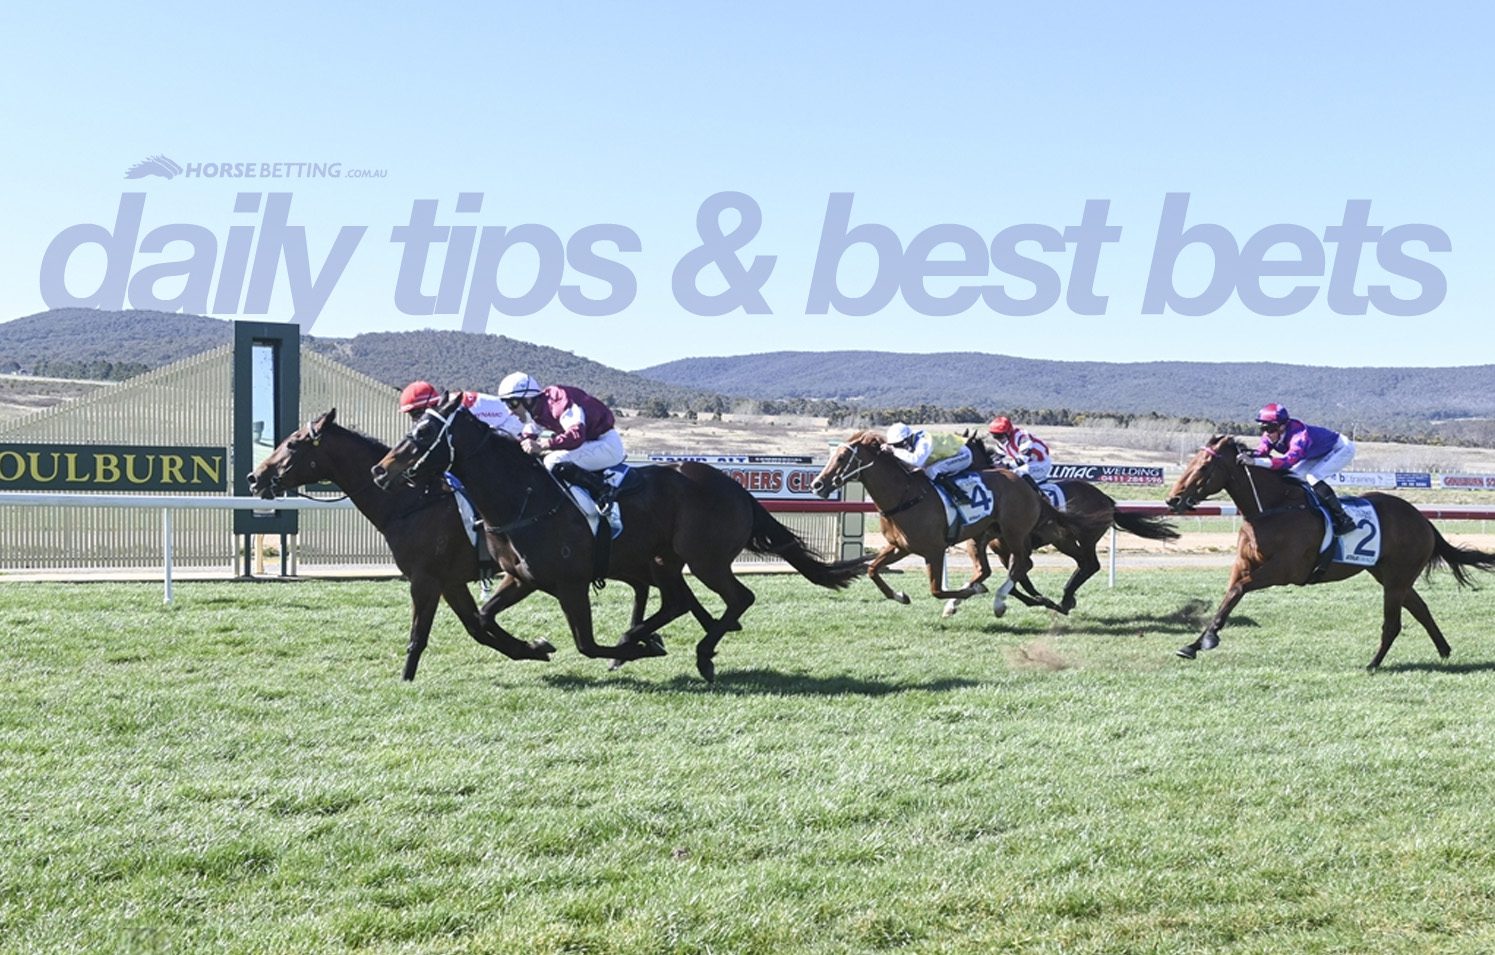 Friday horse racing tips & best bets